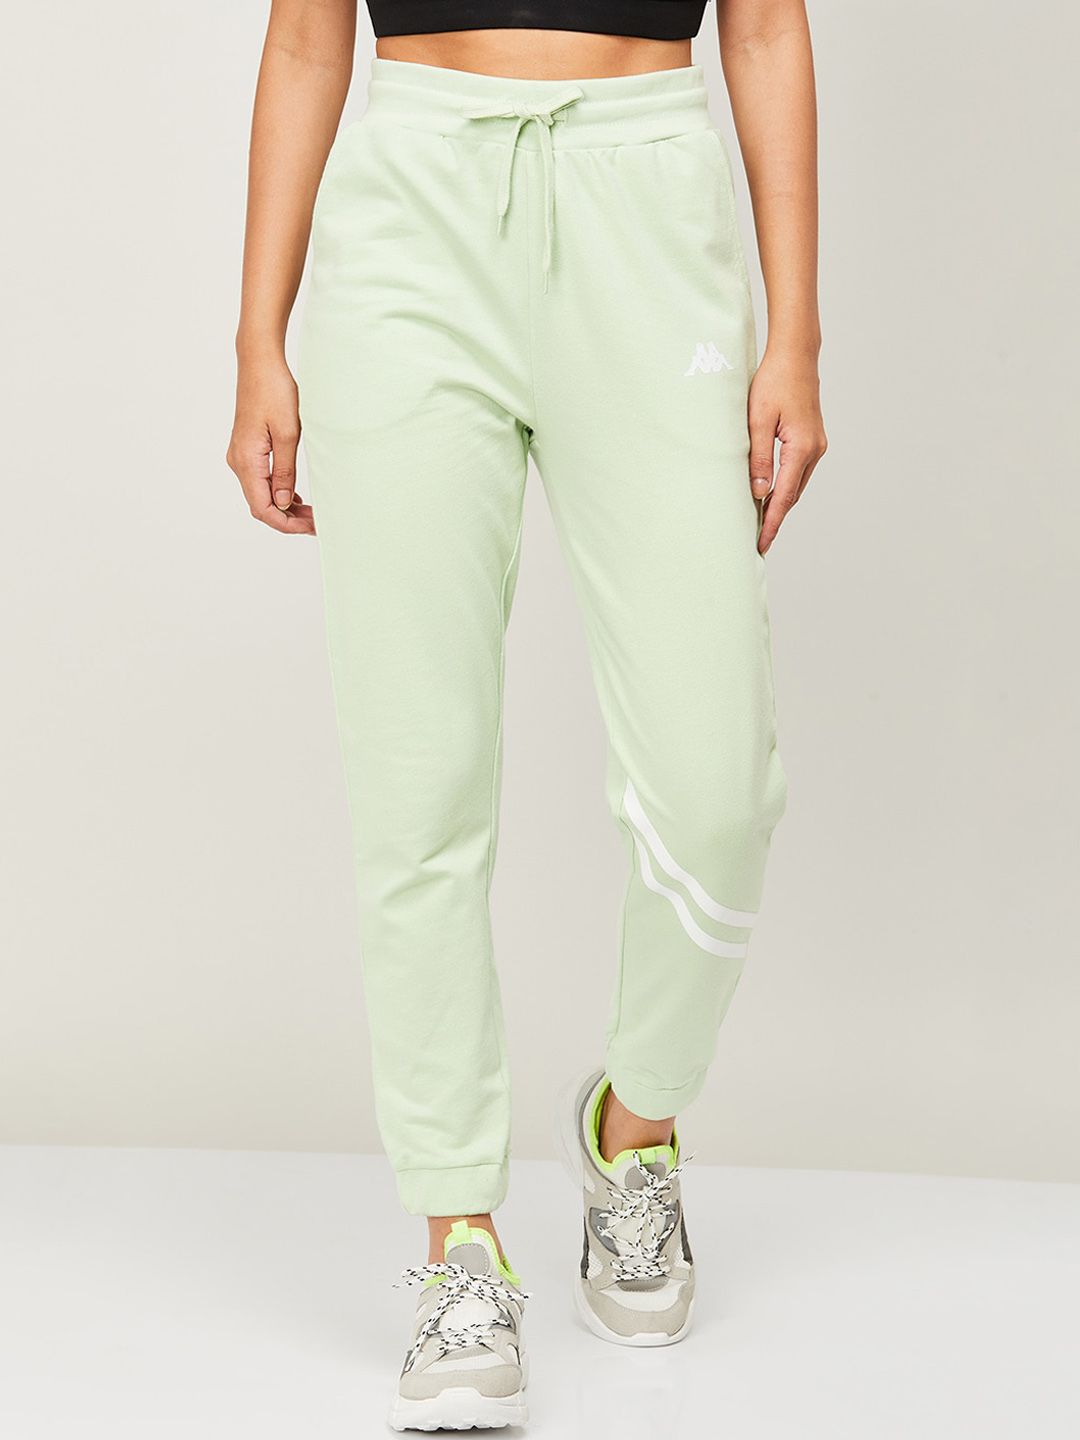 Kappa Women Green Solid Jogger Price in India